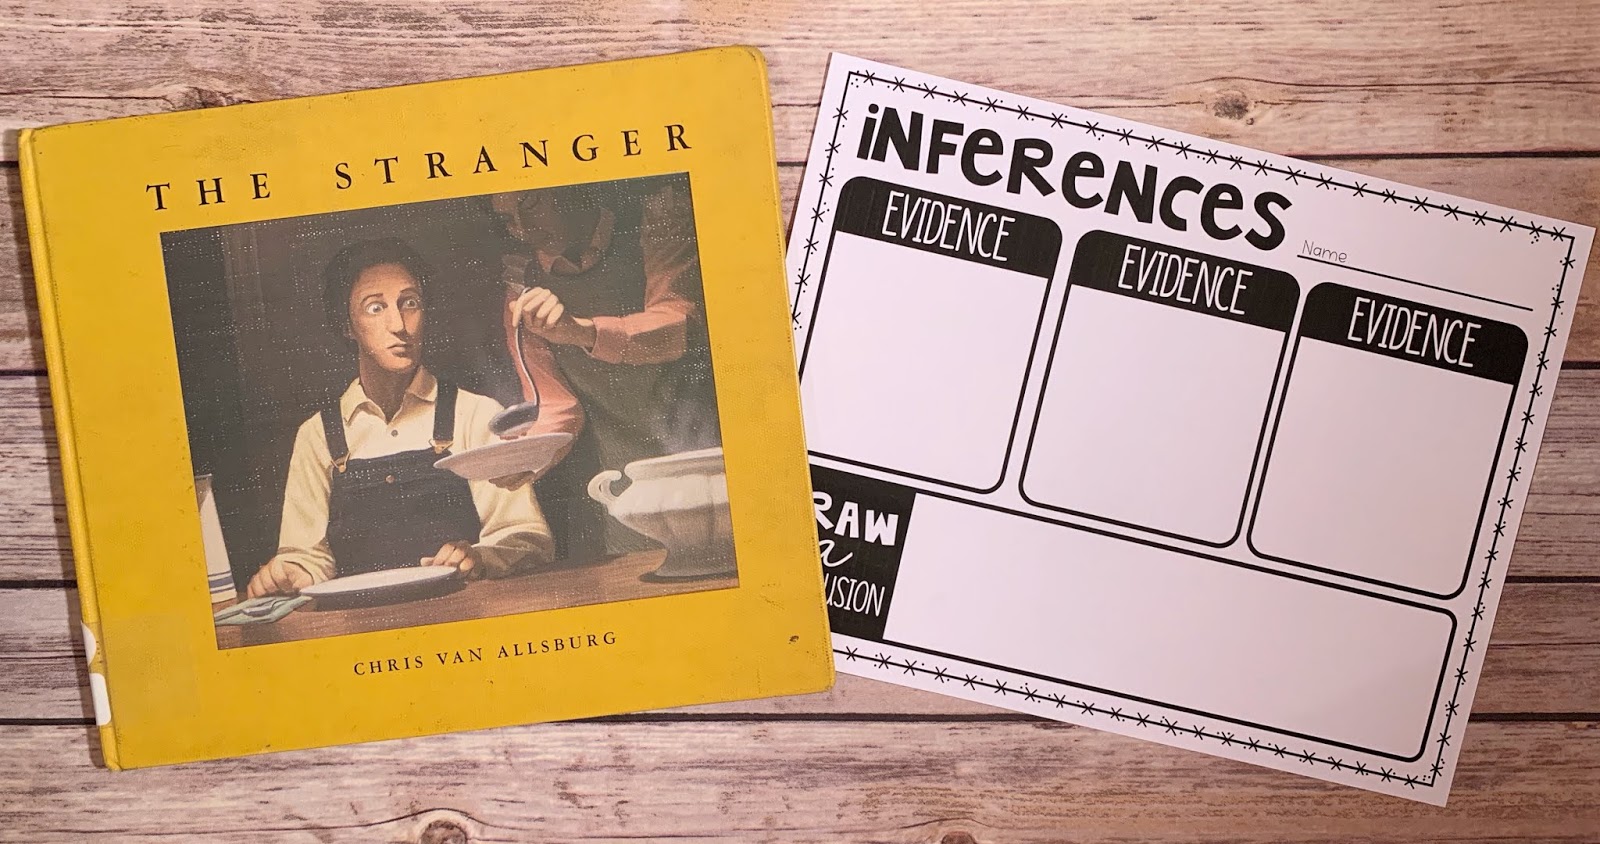 Mentor text with the text "The Stranger" and graphic organizer with text "inferences"